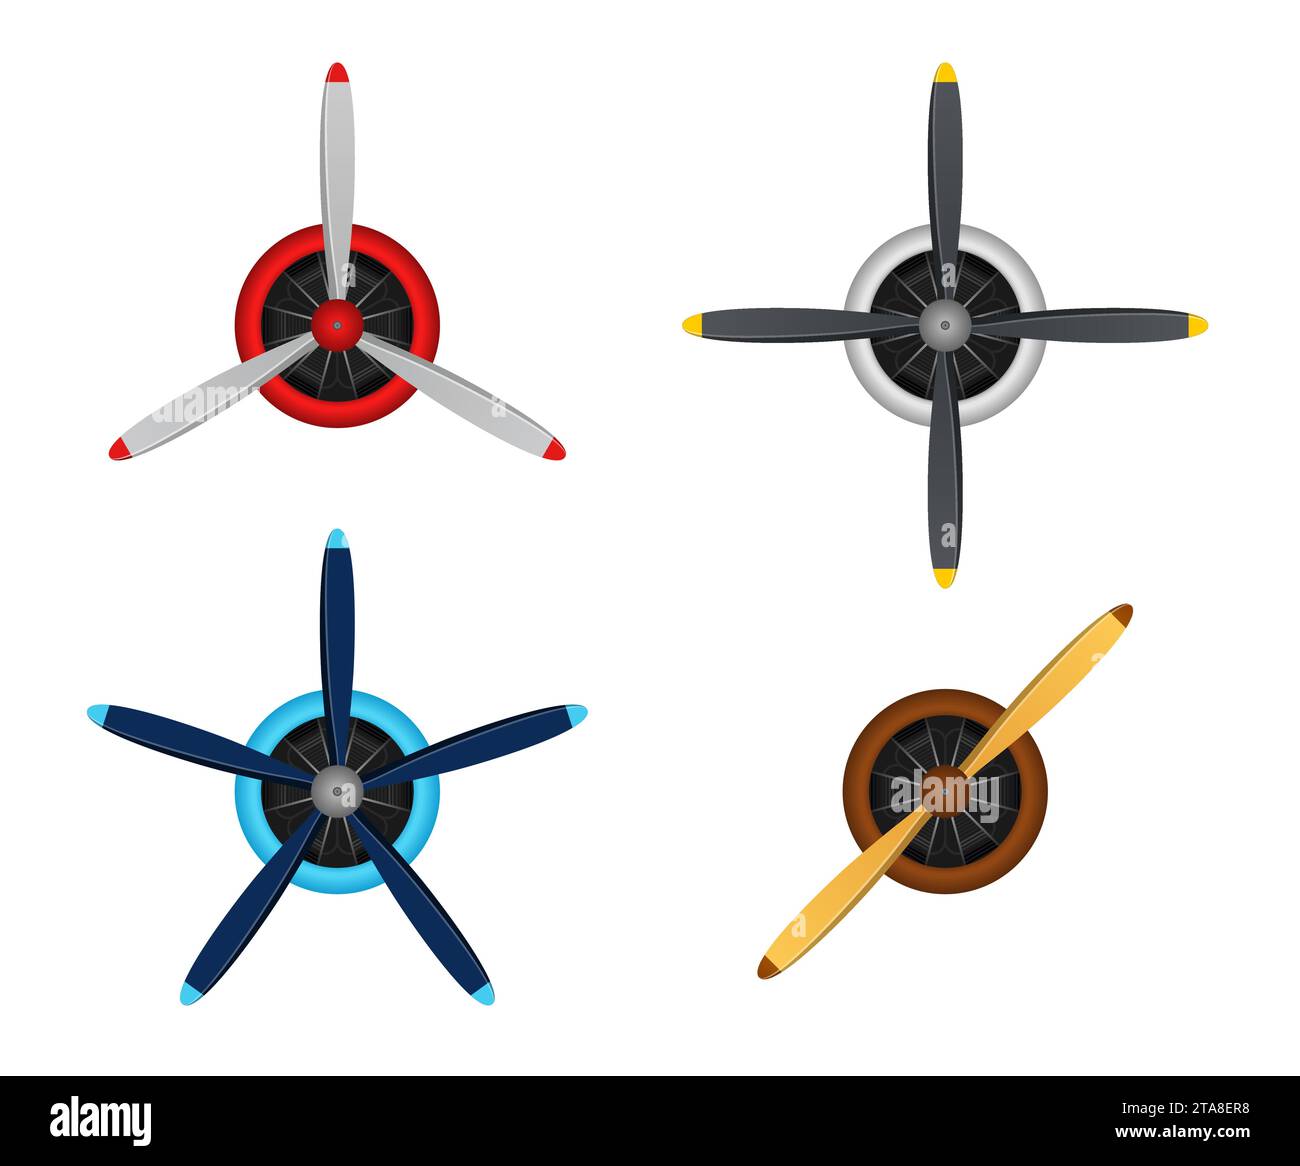 Plane blade propeller set isolated on white background. Vintage airplane propeller icons with radial engine. Turbines icons, fan blade Stock Vector